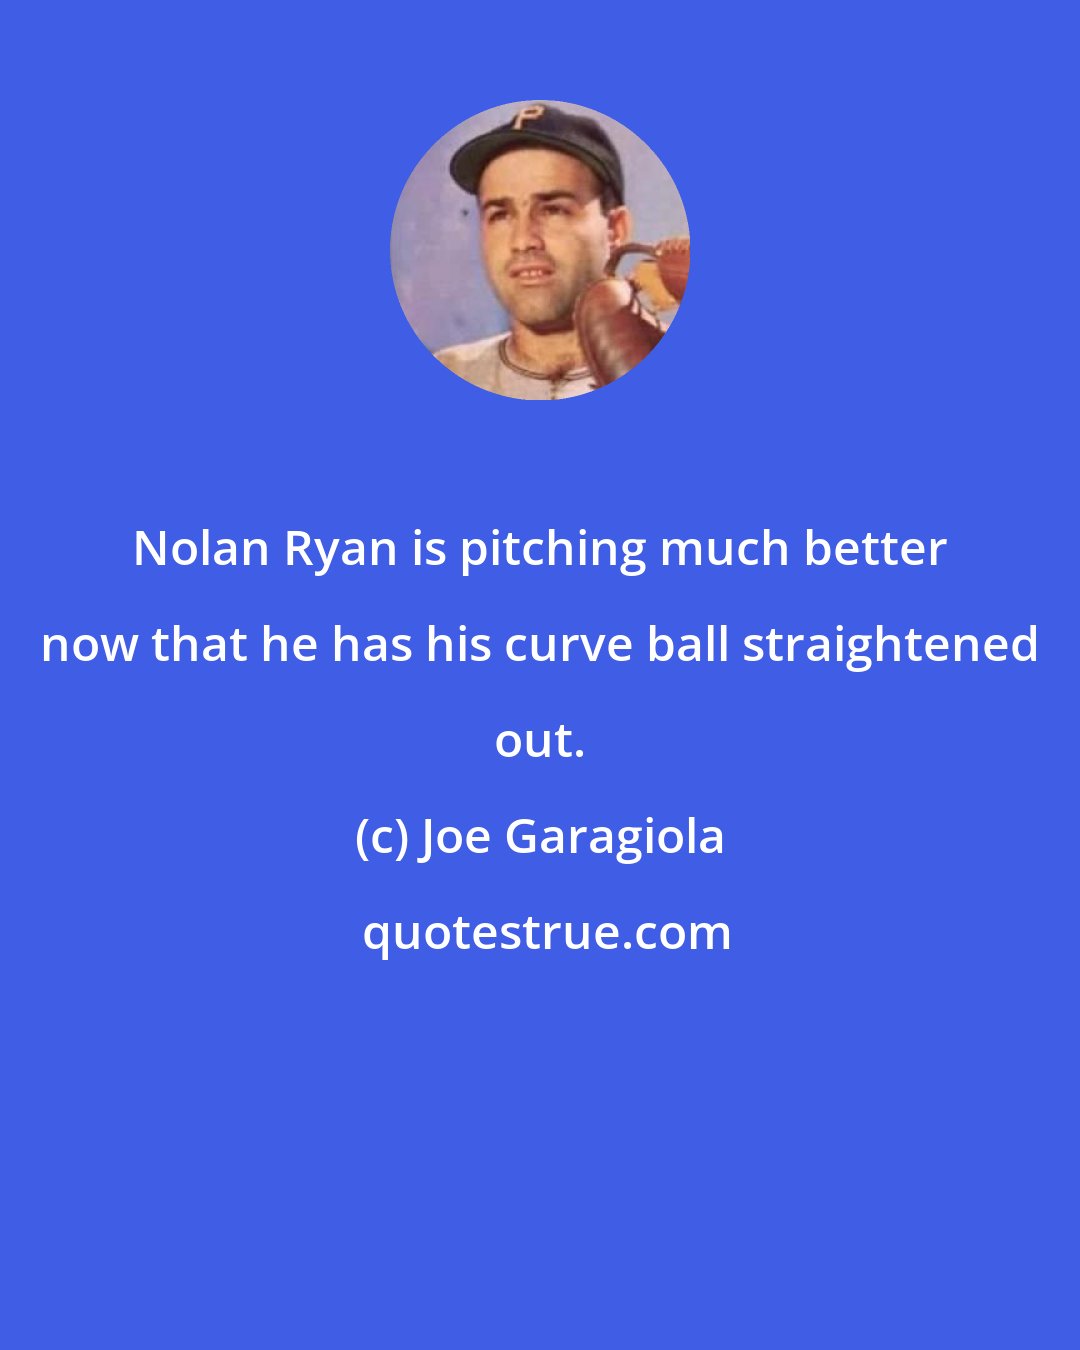 Joe Garagiola: Nolan Ryan is pitching much better now that he has his curve ball straightened out.